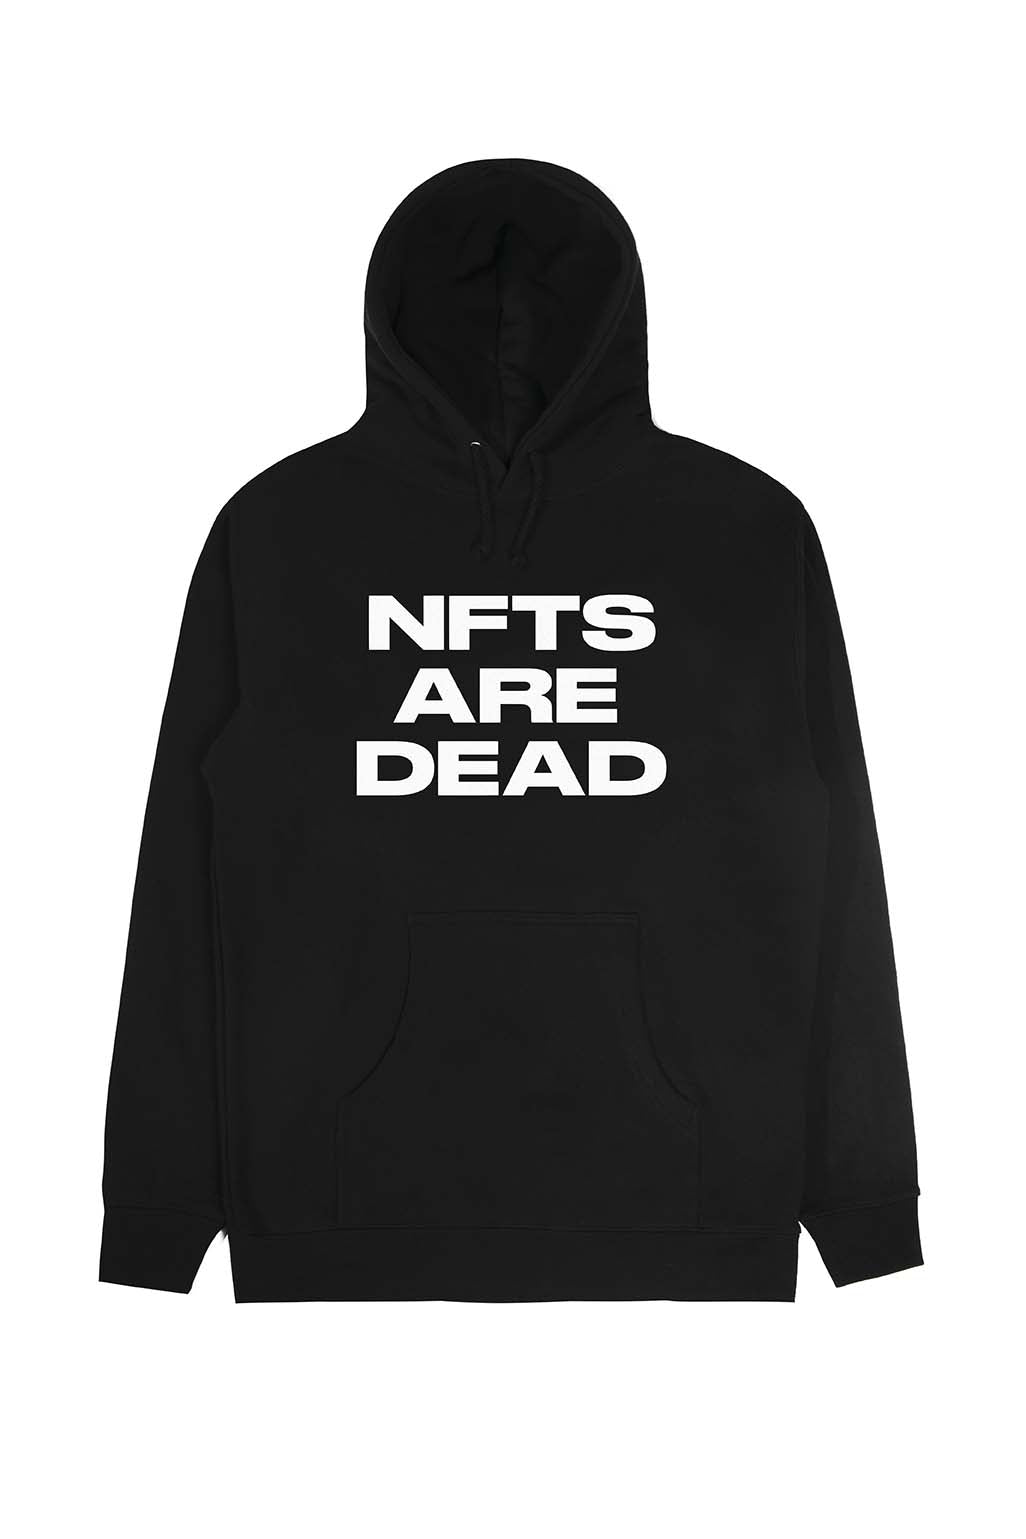 Image of NFTs Are Dead Pullover